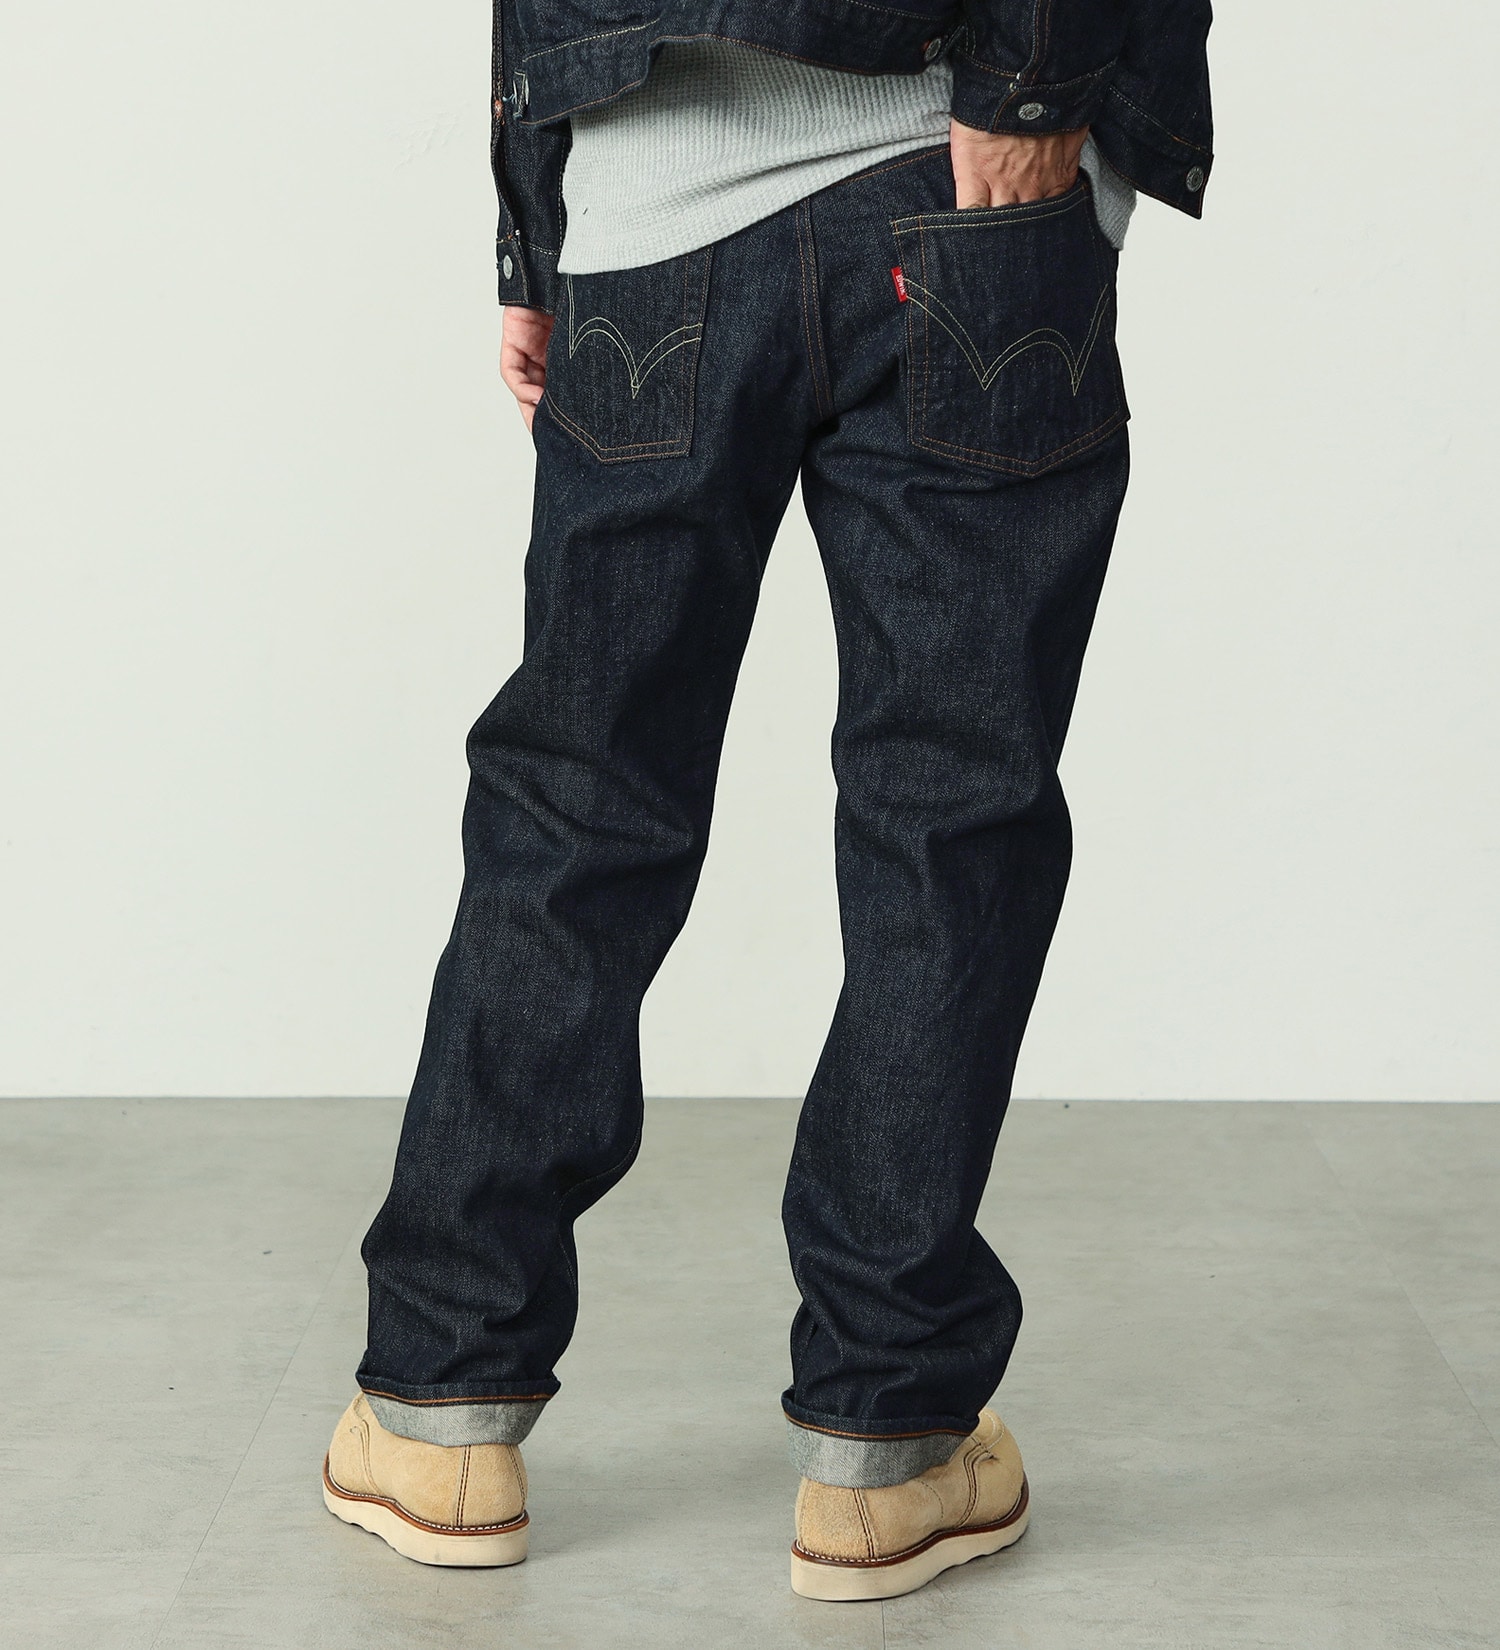 505ZX 50sルーズストレートパンツ SELVAGE VINTAGE LOOSE STRAIGHT MADE IN JAPAN 日本製 セルビッチ